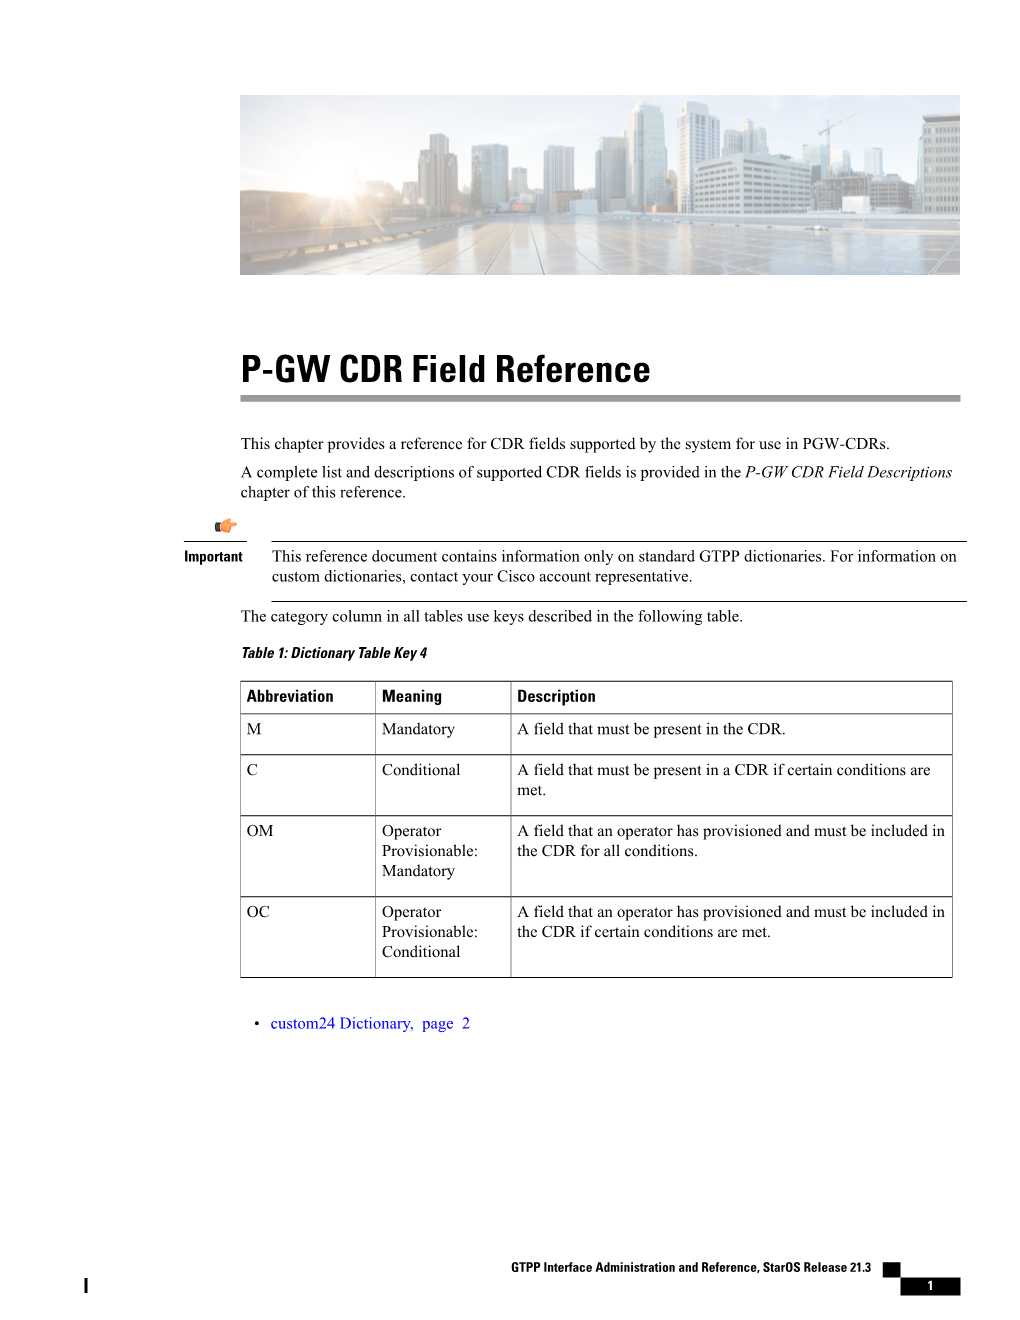 P-GW CDR Field Reference